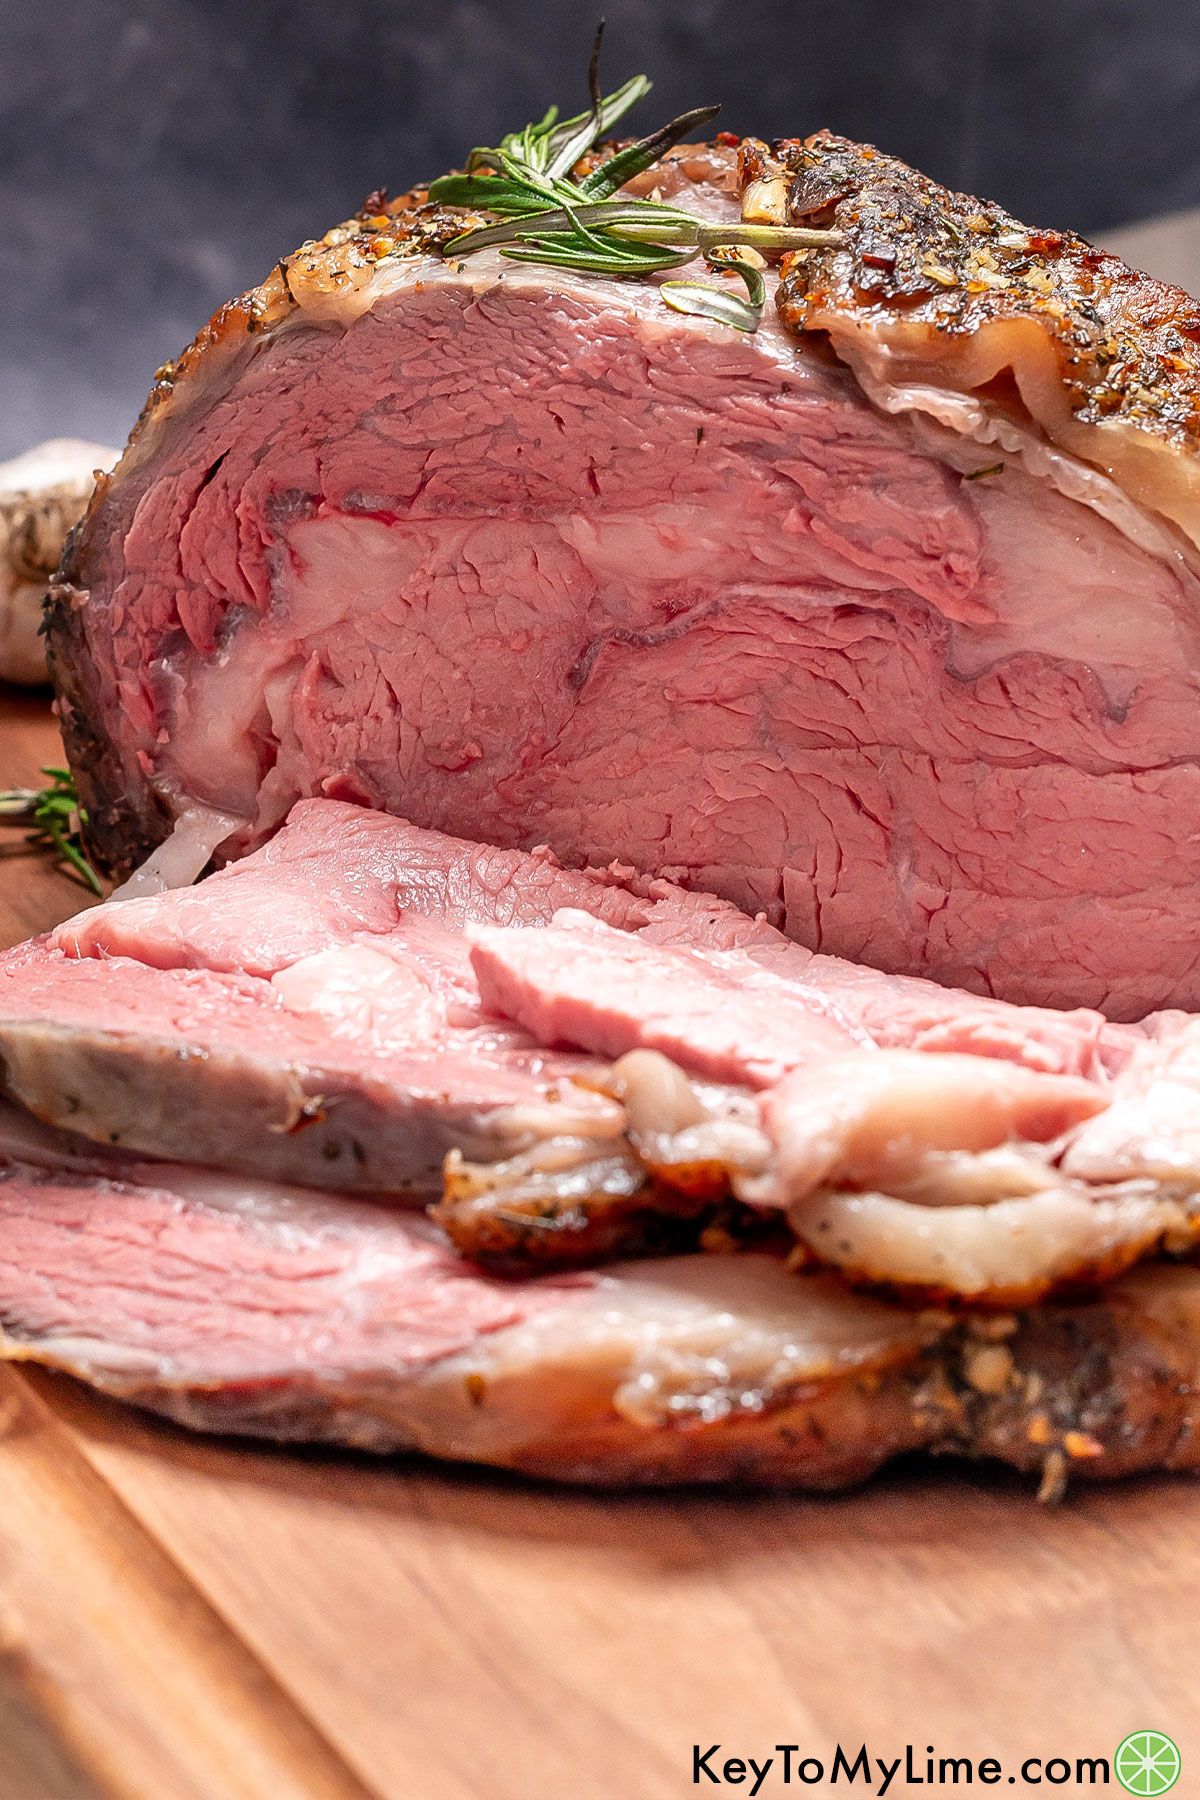 A close up image of a sliced prime rib roast showing the inside texture.